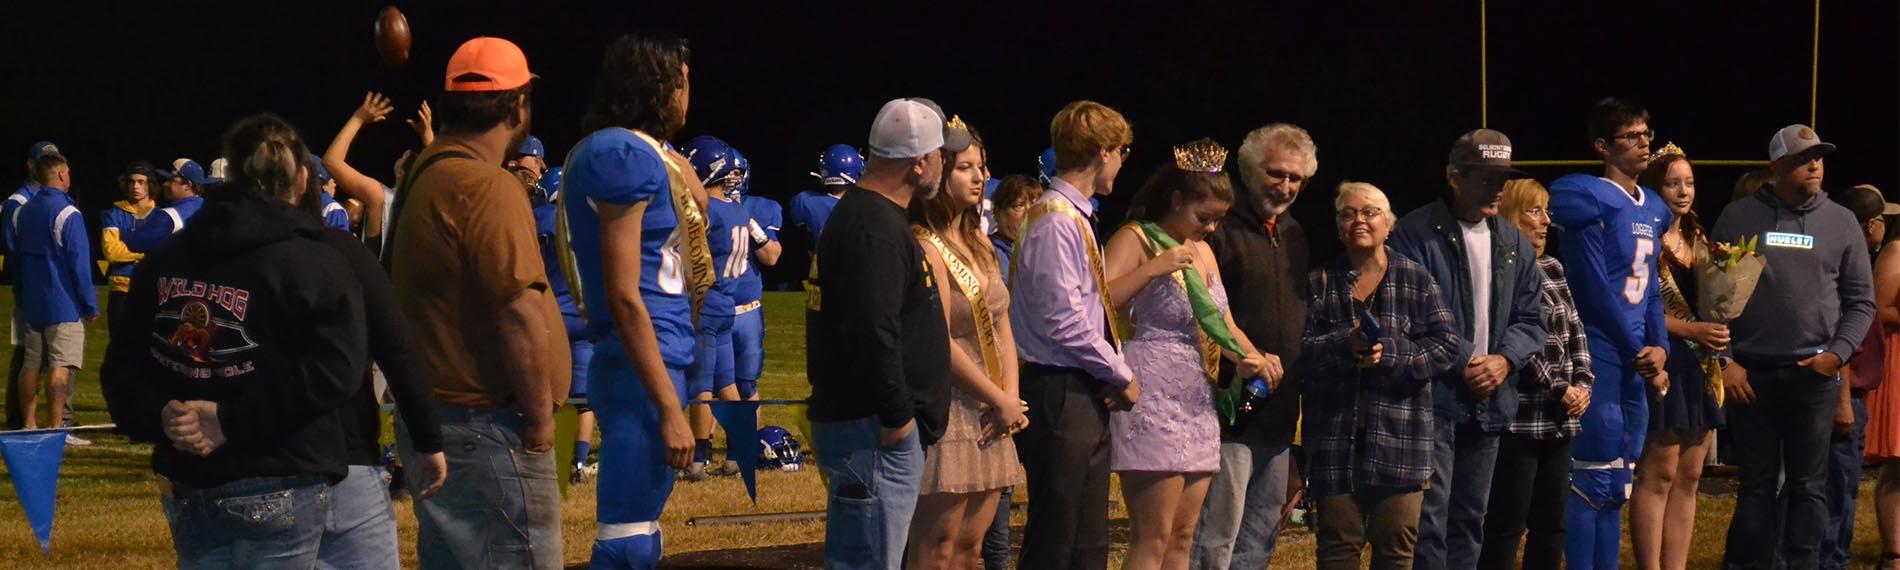 Homecoming Queen Crowned